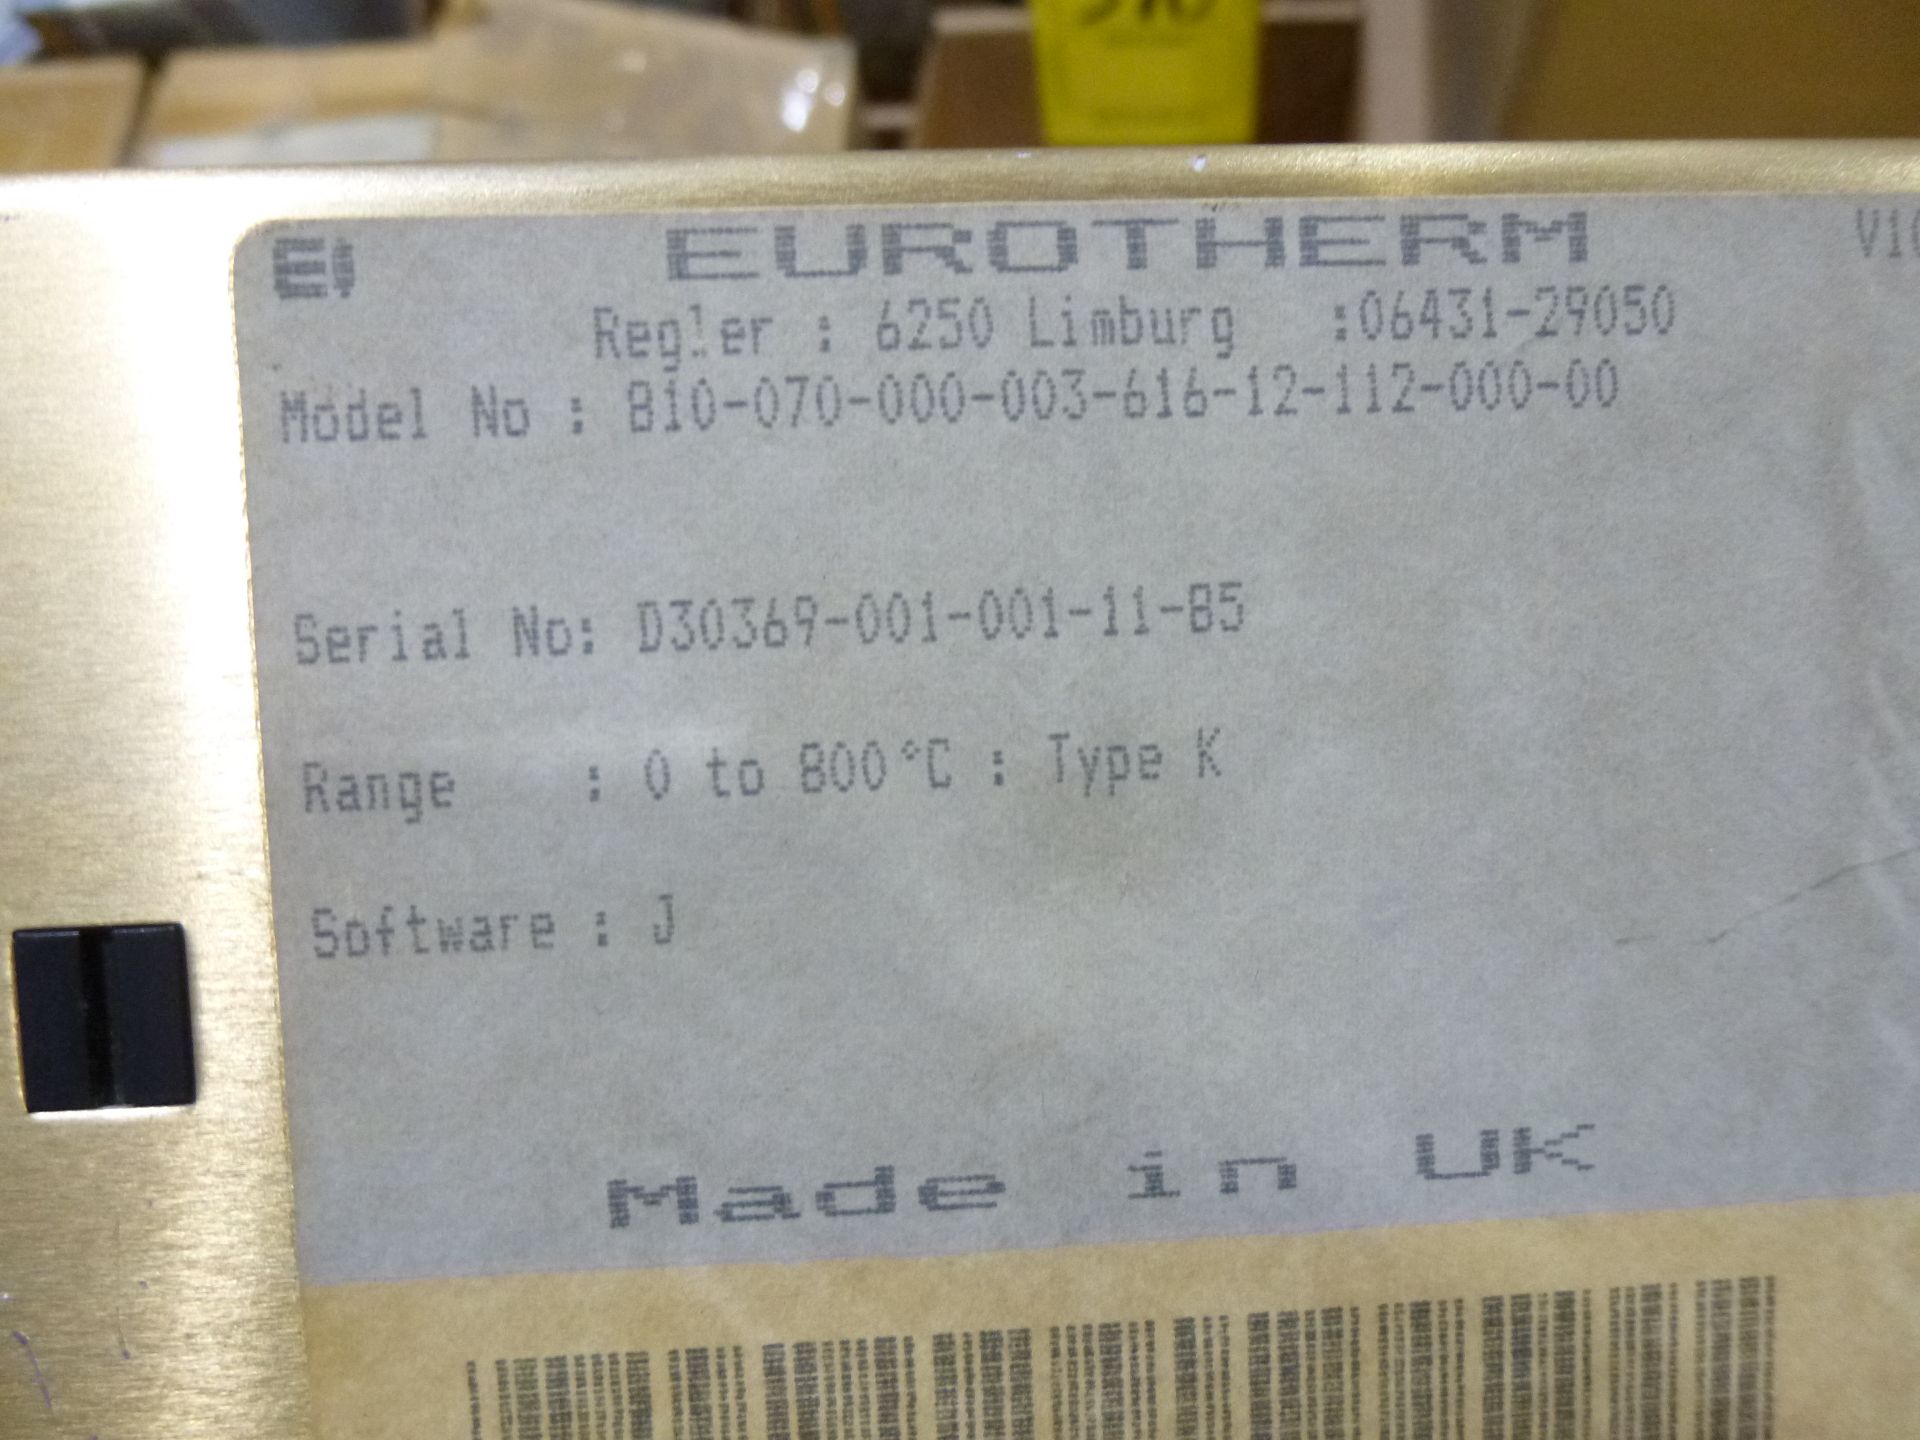 Qty 2 Eurotherm controllers, model 810-070-000-003-616-12-112-000-00, used, as always with Brolyn - Image 2 of 2